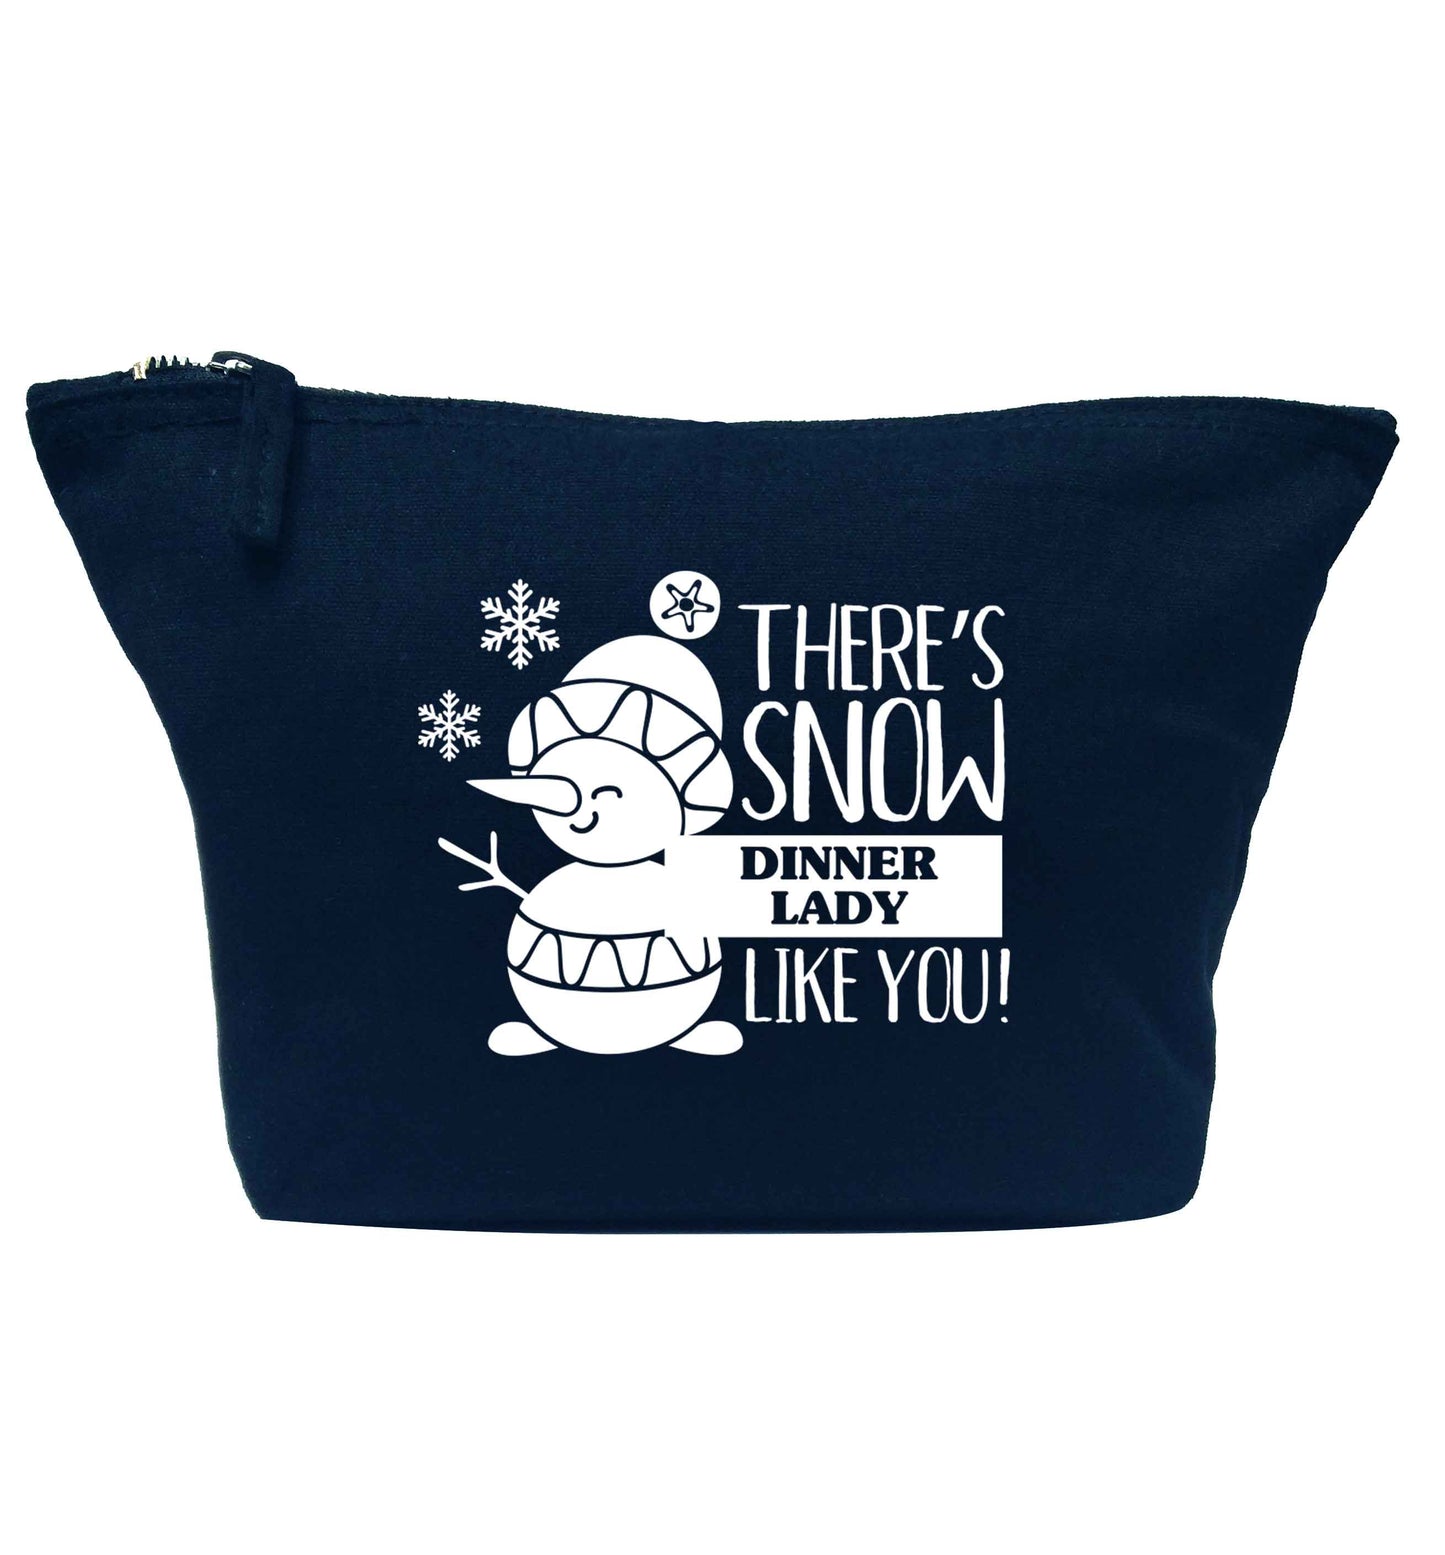 There's snow dinner lady like you navy makeup bag